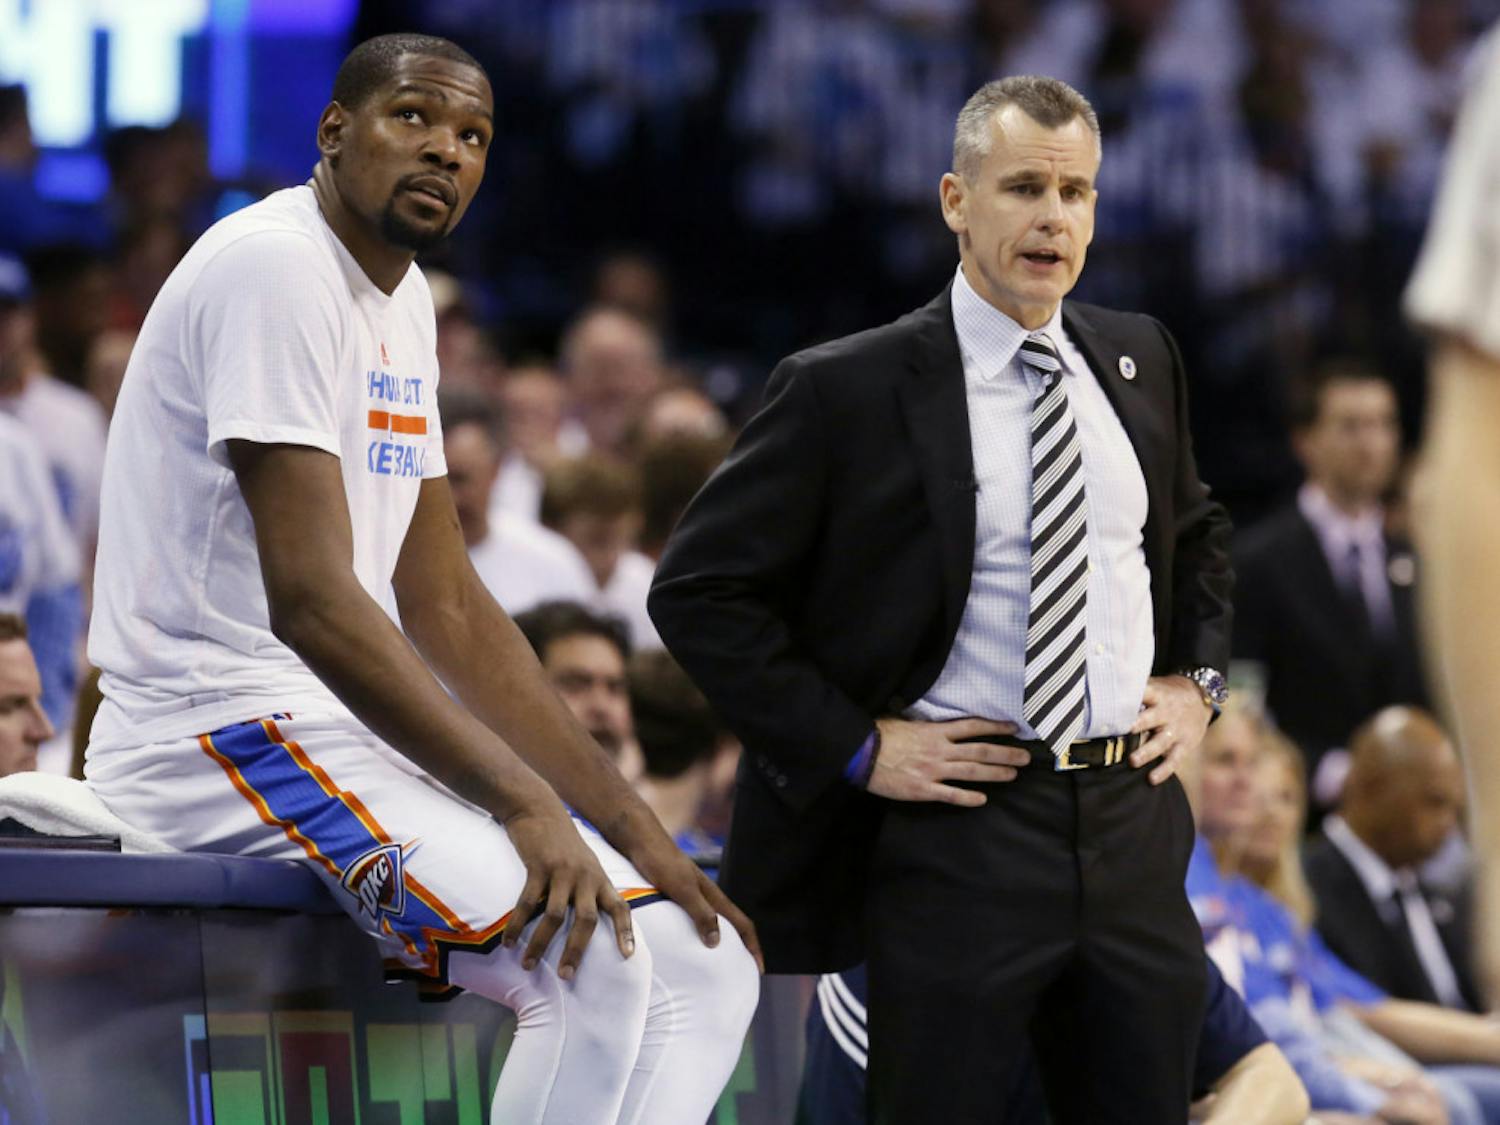 Oklahoma City Thunder forward Kevin Durant (35) and head coach Billy Donovan watch from the sideline against the Golden State Warriors second half in Game 3 of the NBA basketball Western Conference finals in Oklahoma City, Sunday, May 22, 2016. (AP Photo/Sue Ogrocki)